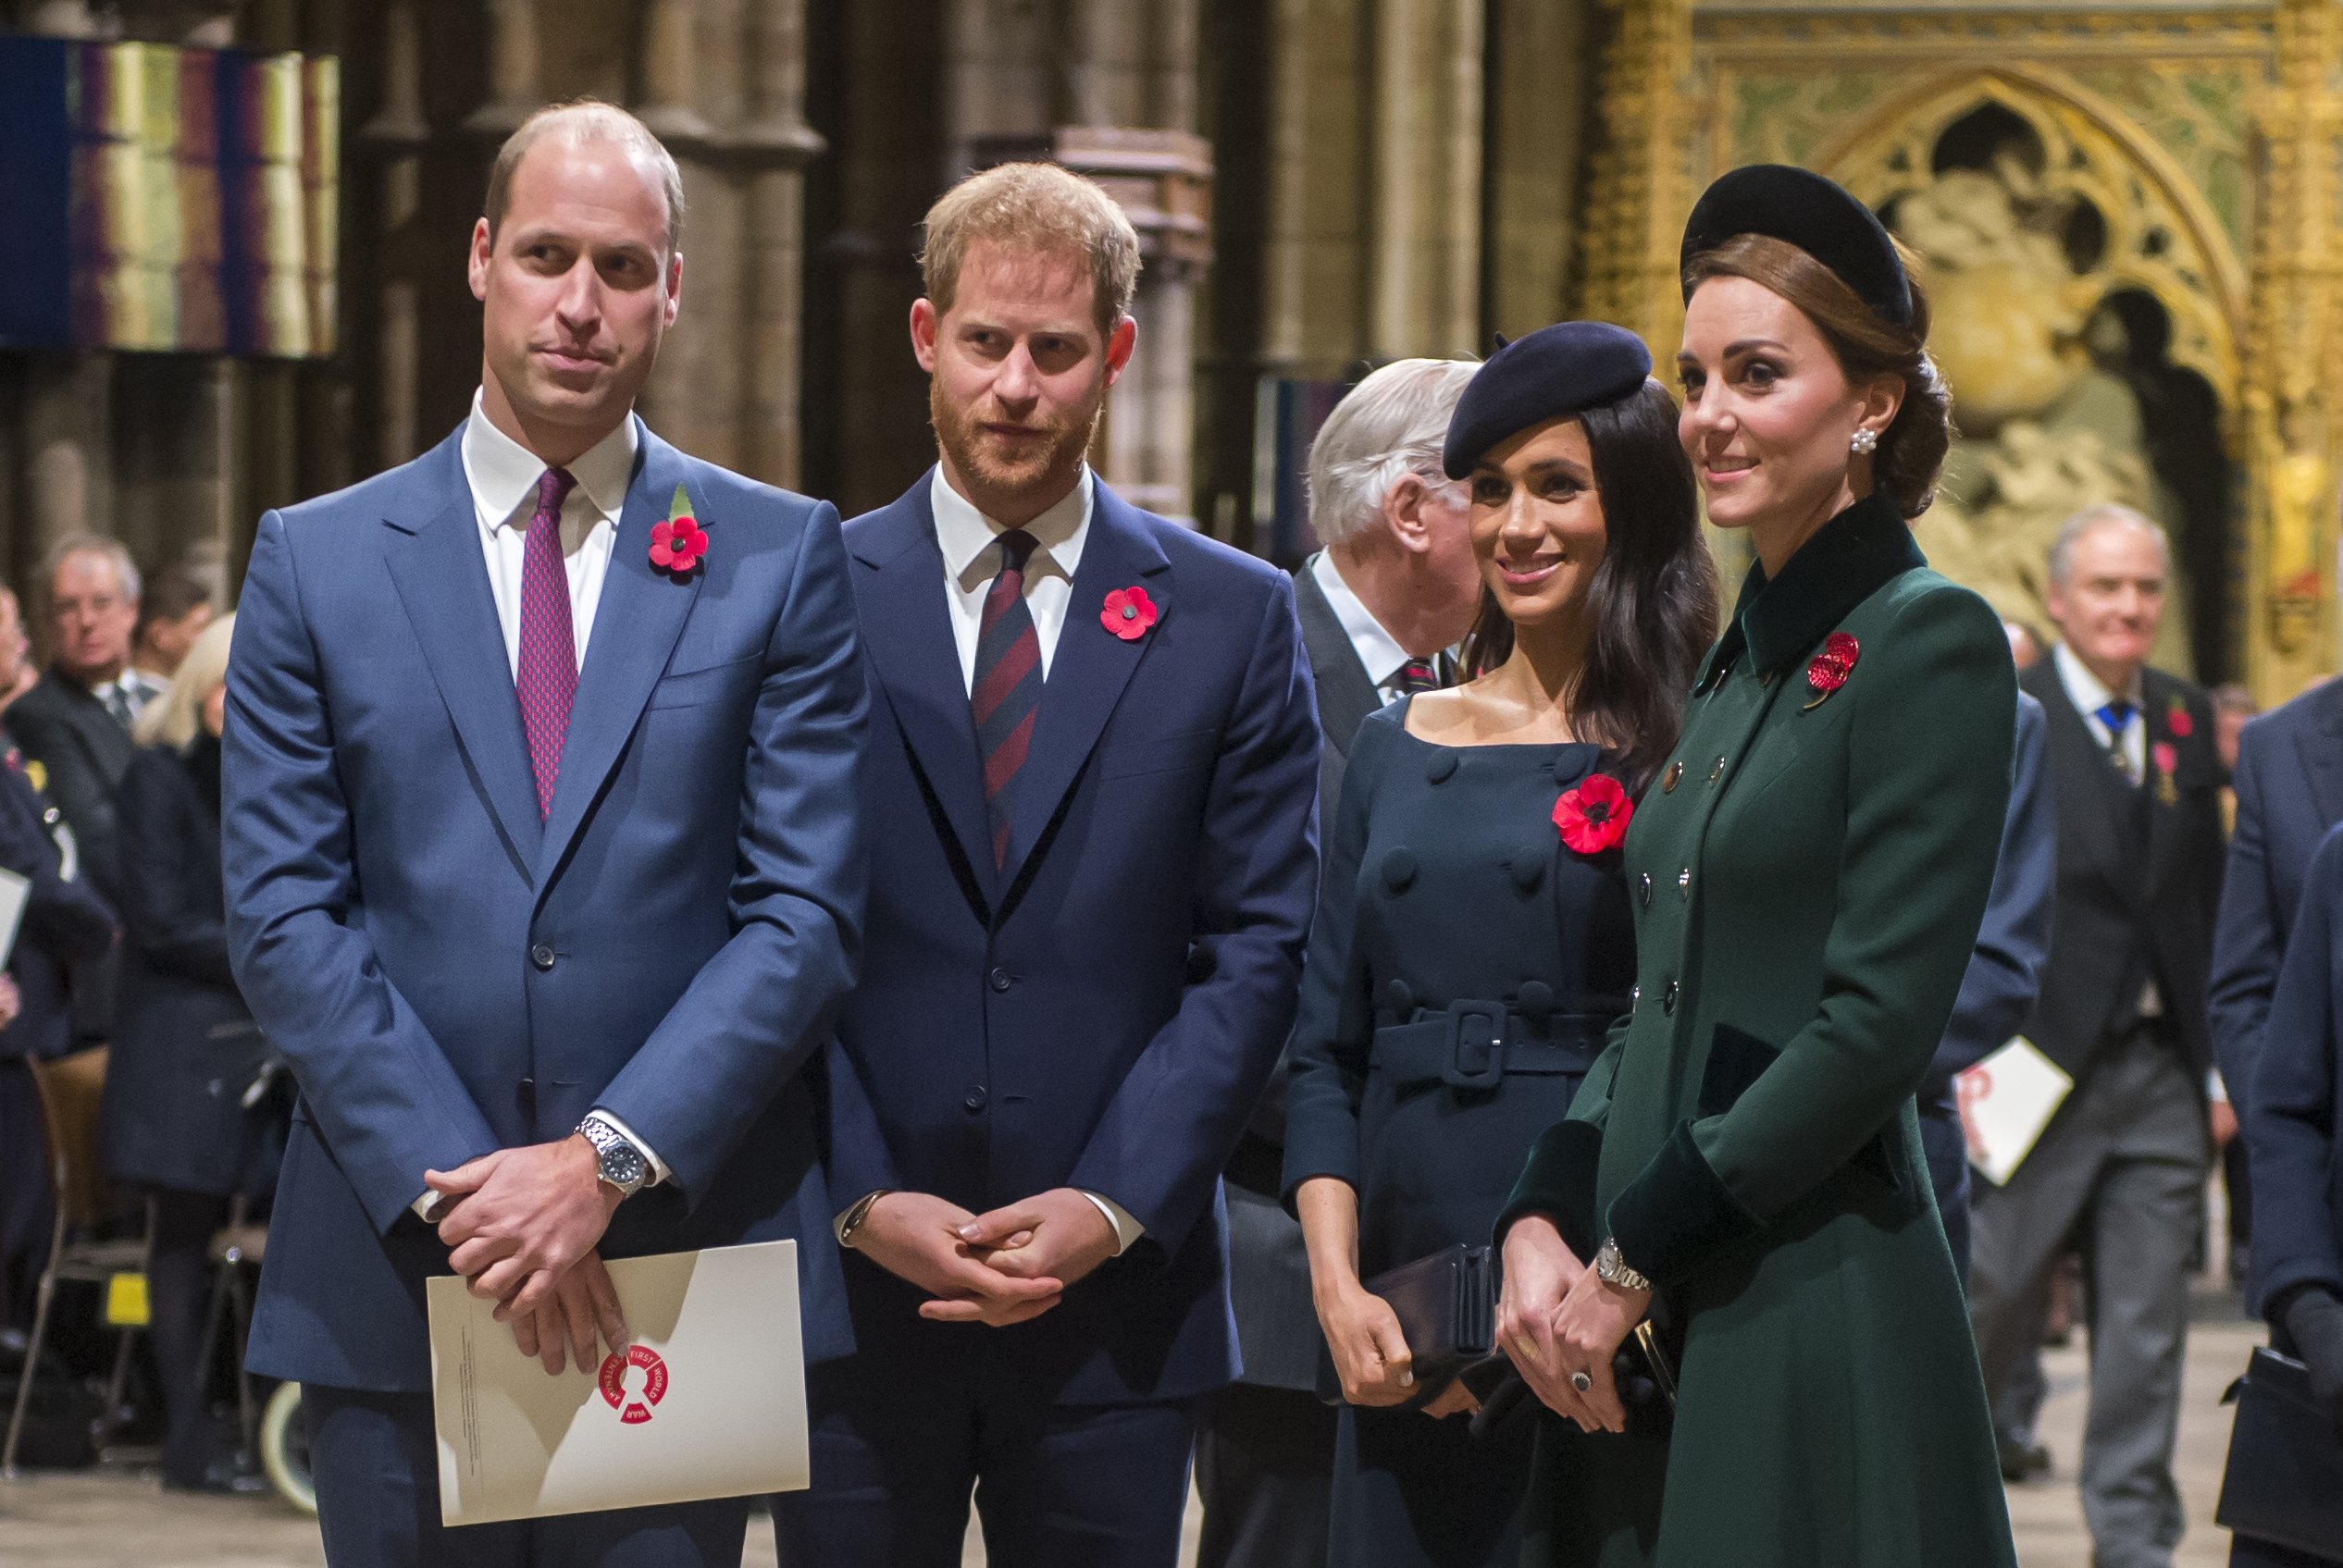 Prince William, Kate Middleton, Prince Harry and Meghan Markle attend a service at Westminster Abbey on November 11, 2018 in London, England | Photo: Getty Images